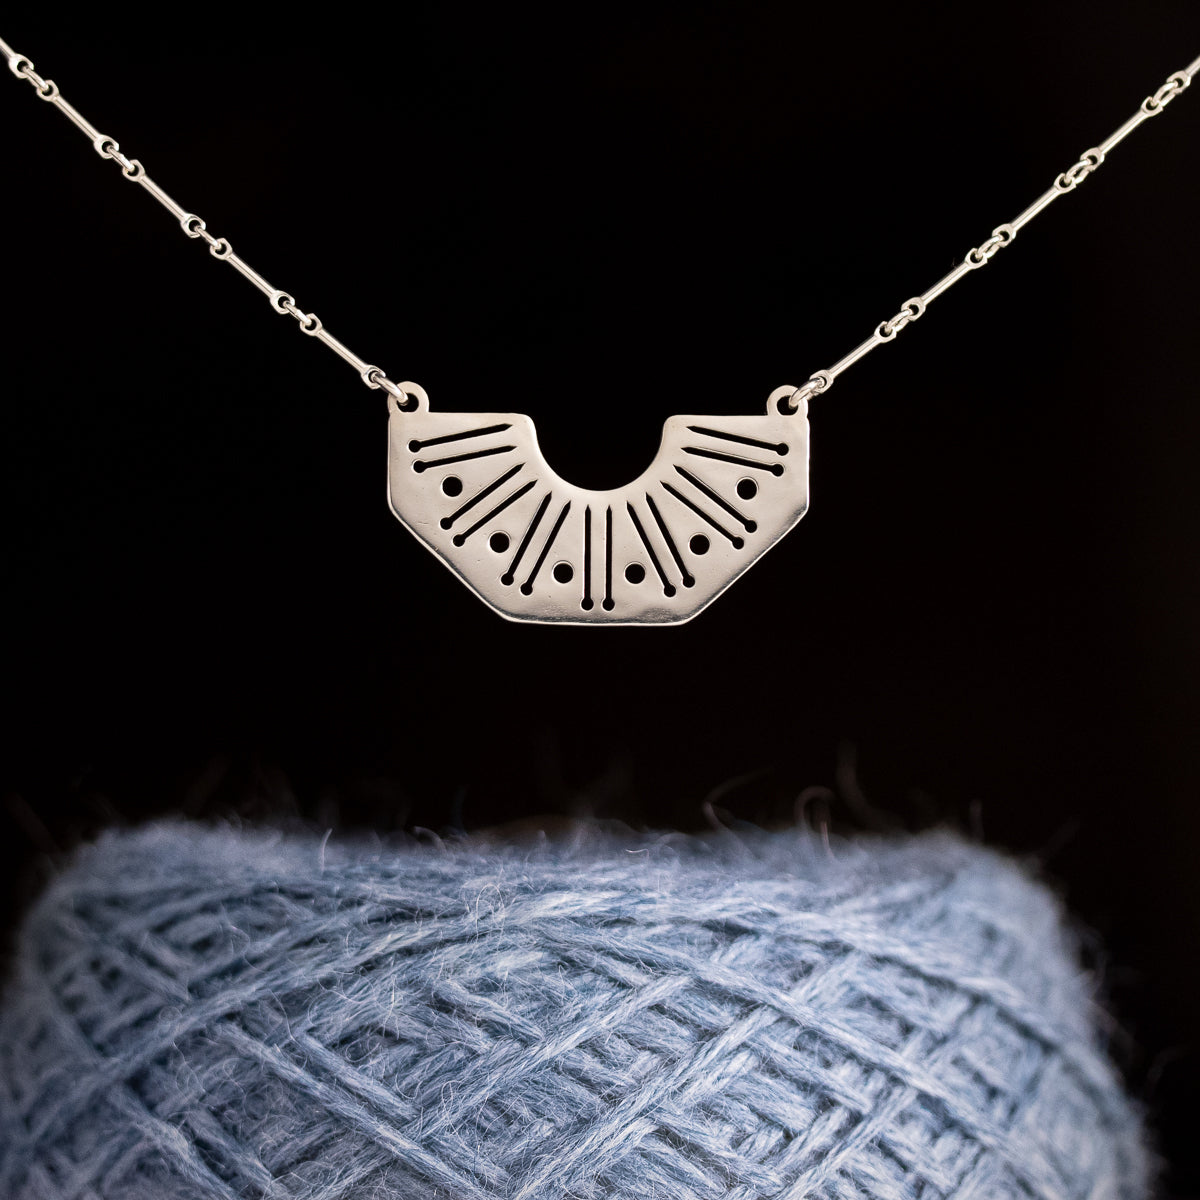  Silver Knitting Needles and Yarn Motif Necklace